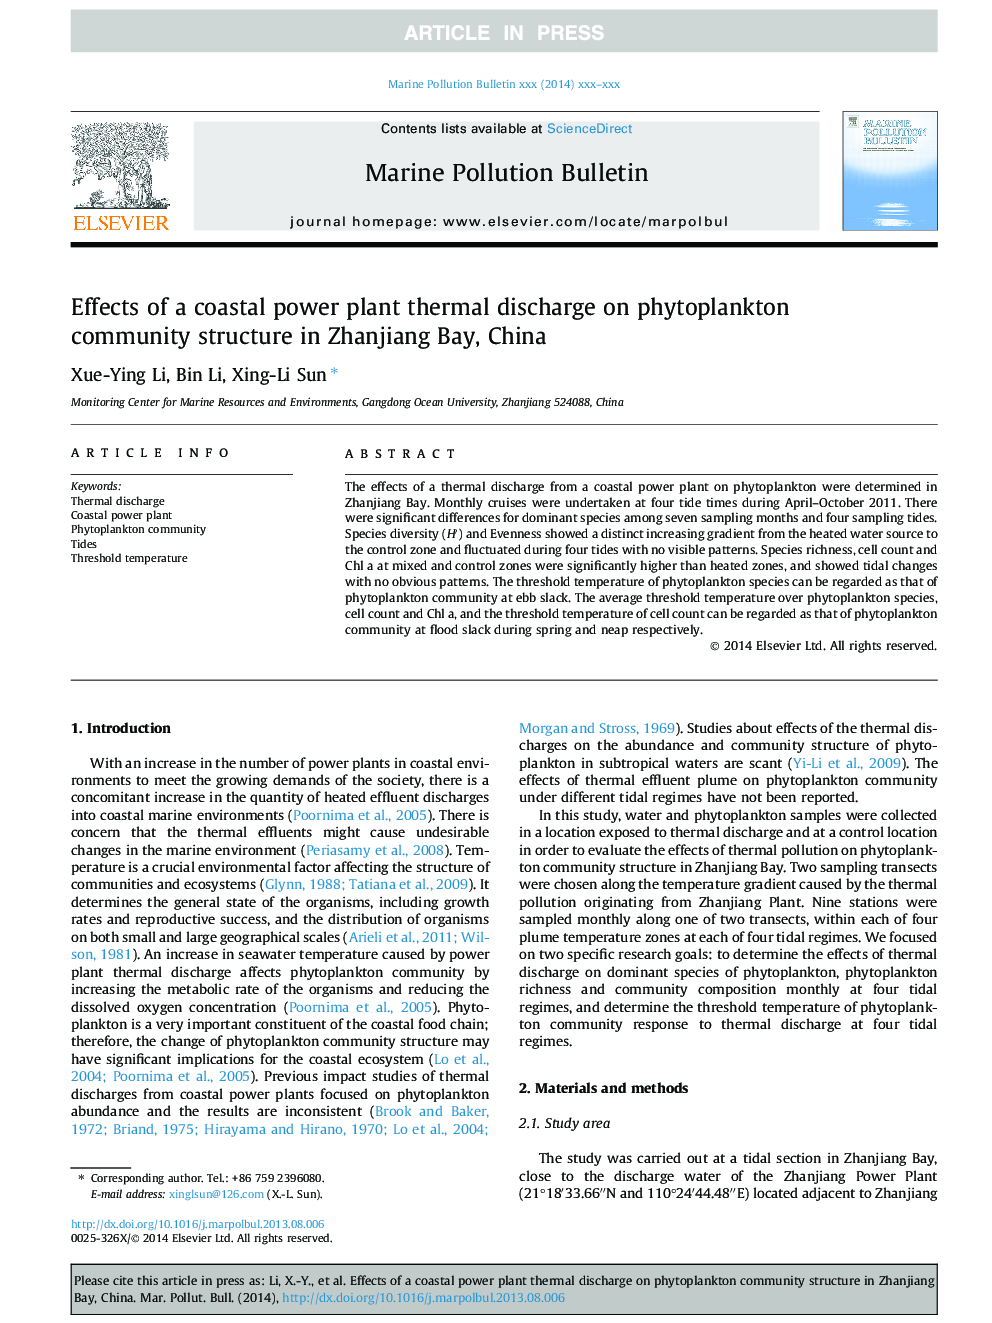 Effects of a coastal power plant thermal discharge on phytoplankton community structure in Zhanjiang Bay, China